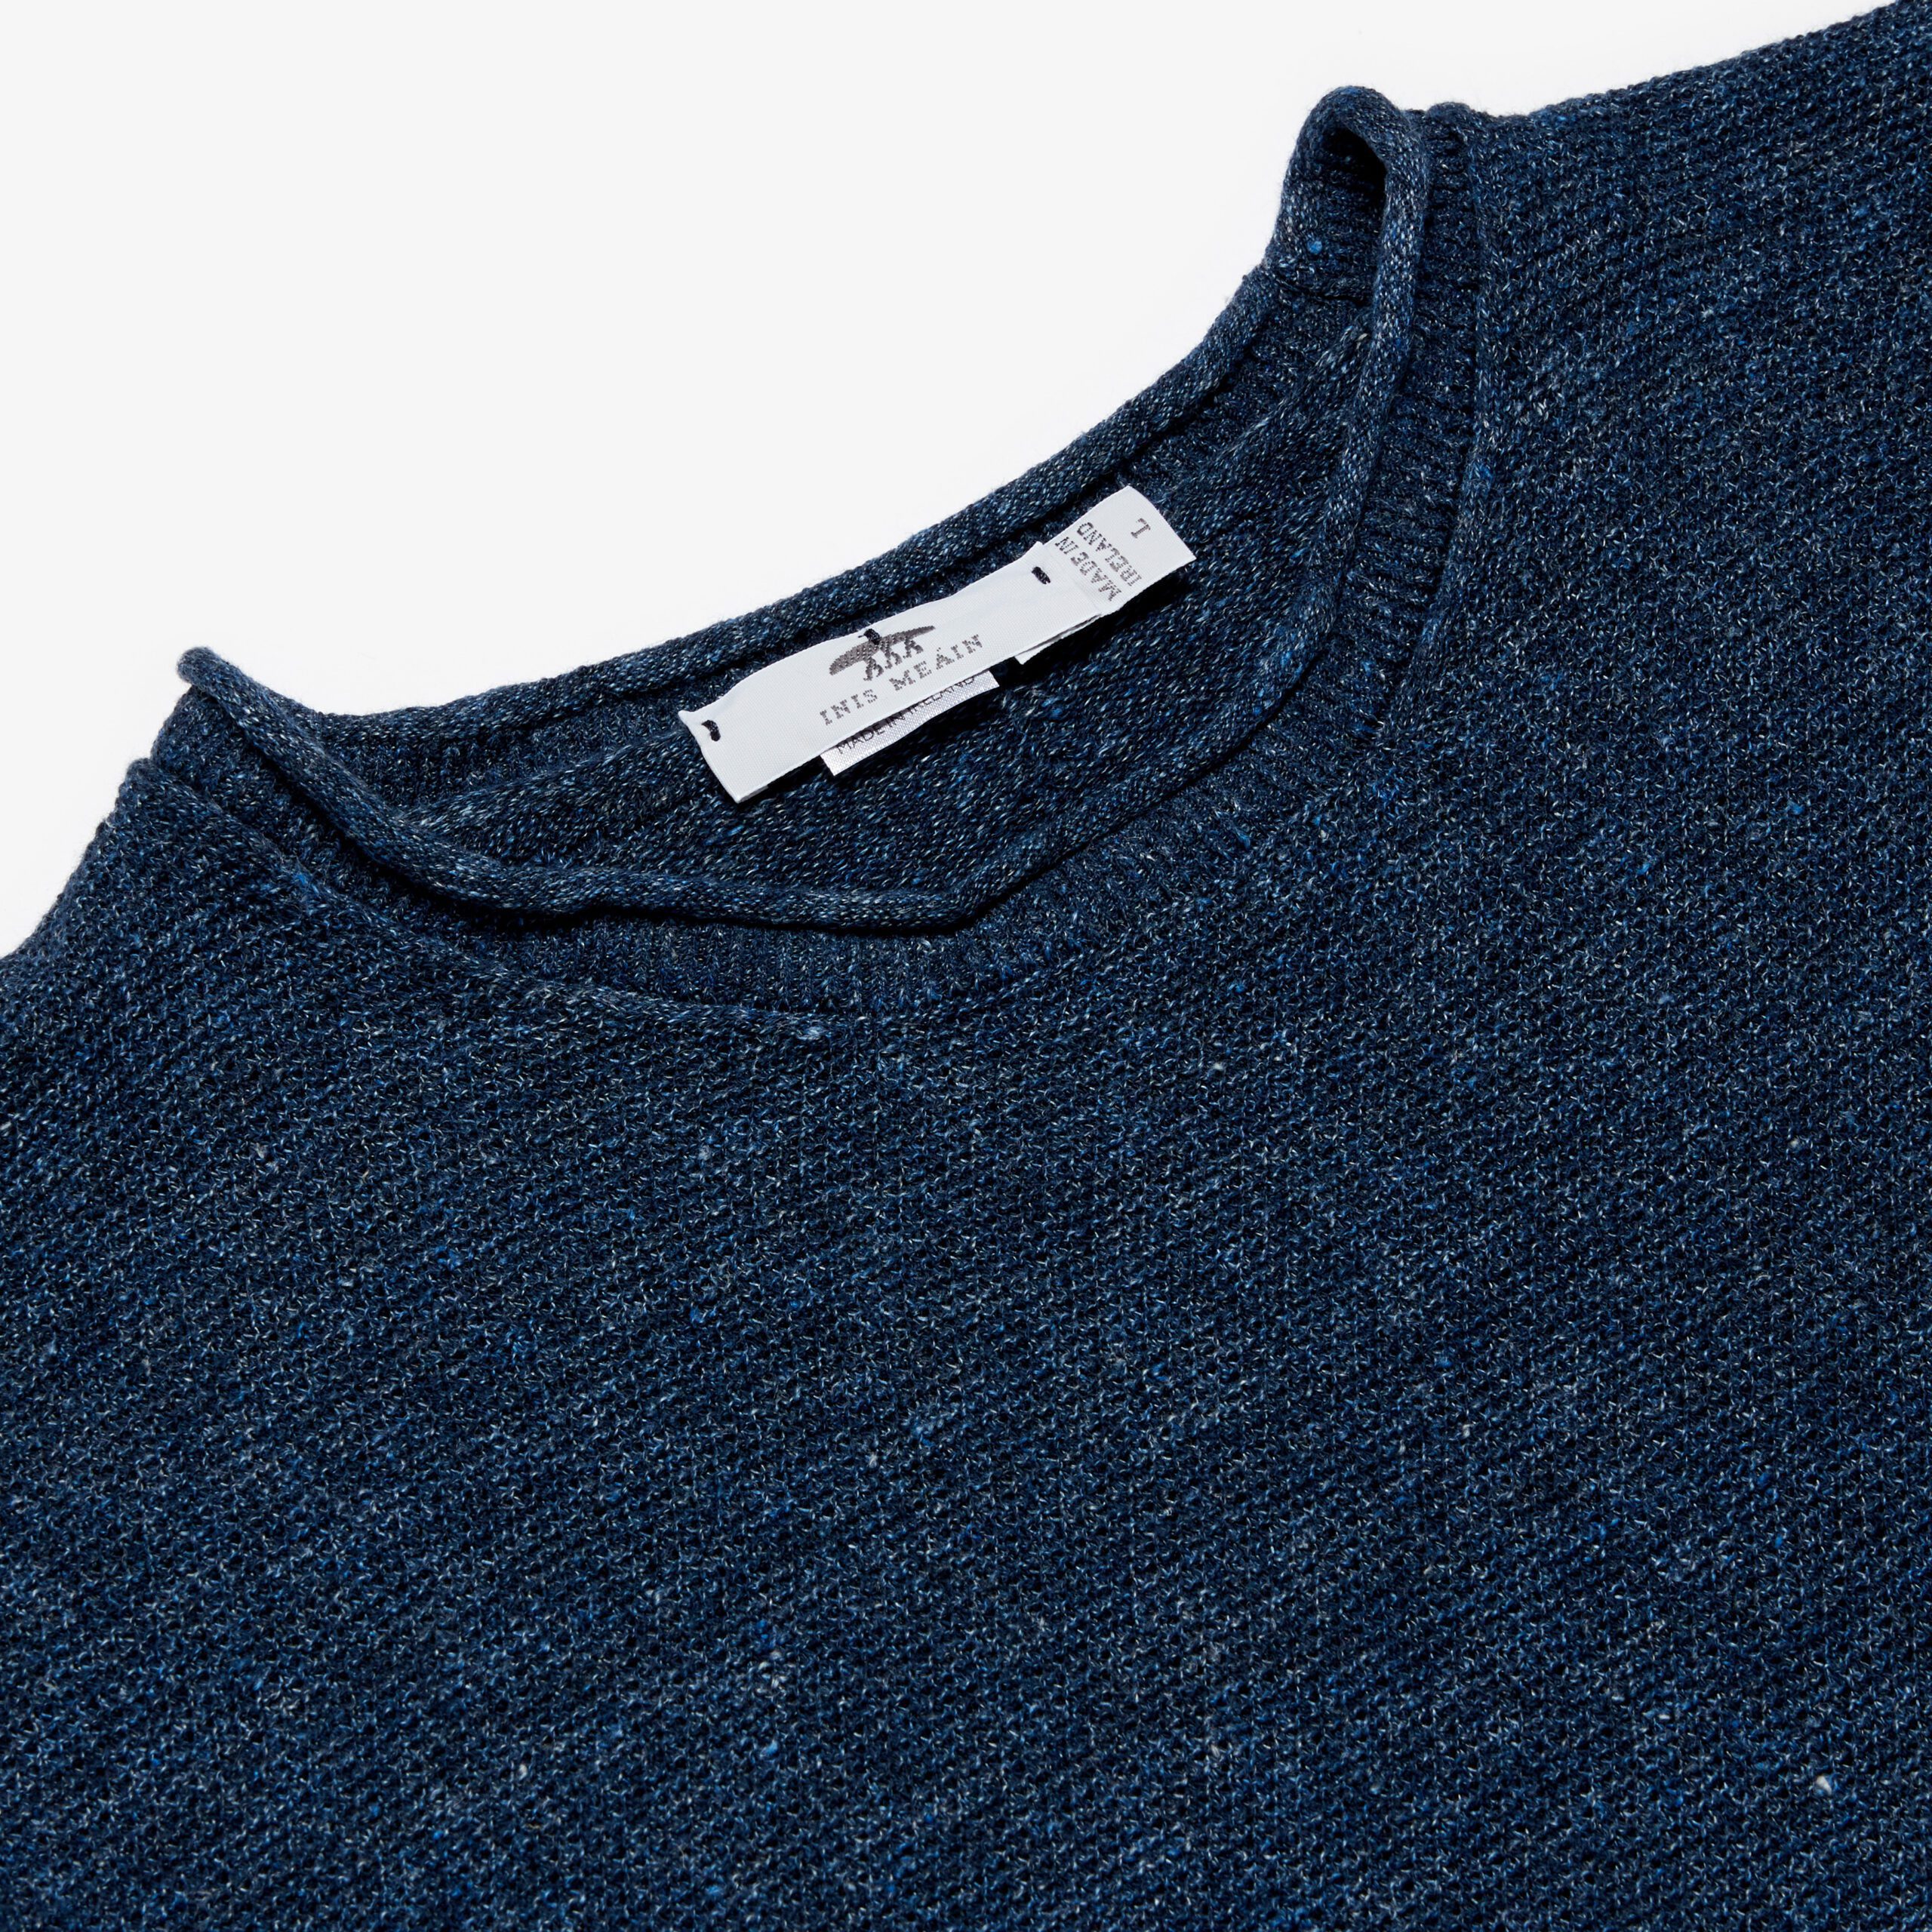 Behind the Linenstitch Seamless Tunic — Inis Meáin Knitwear